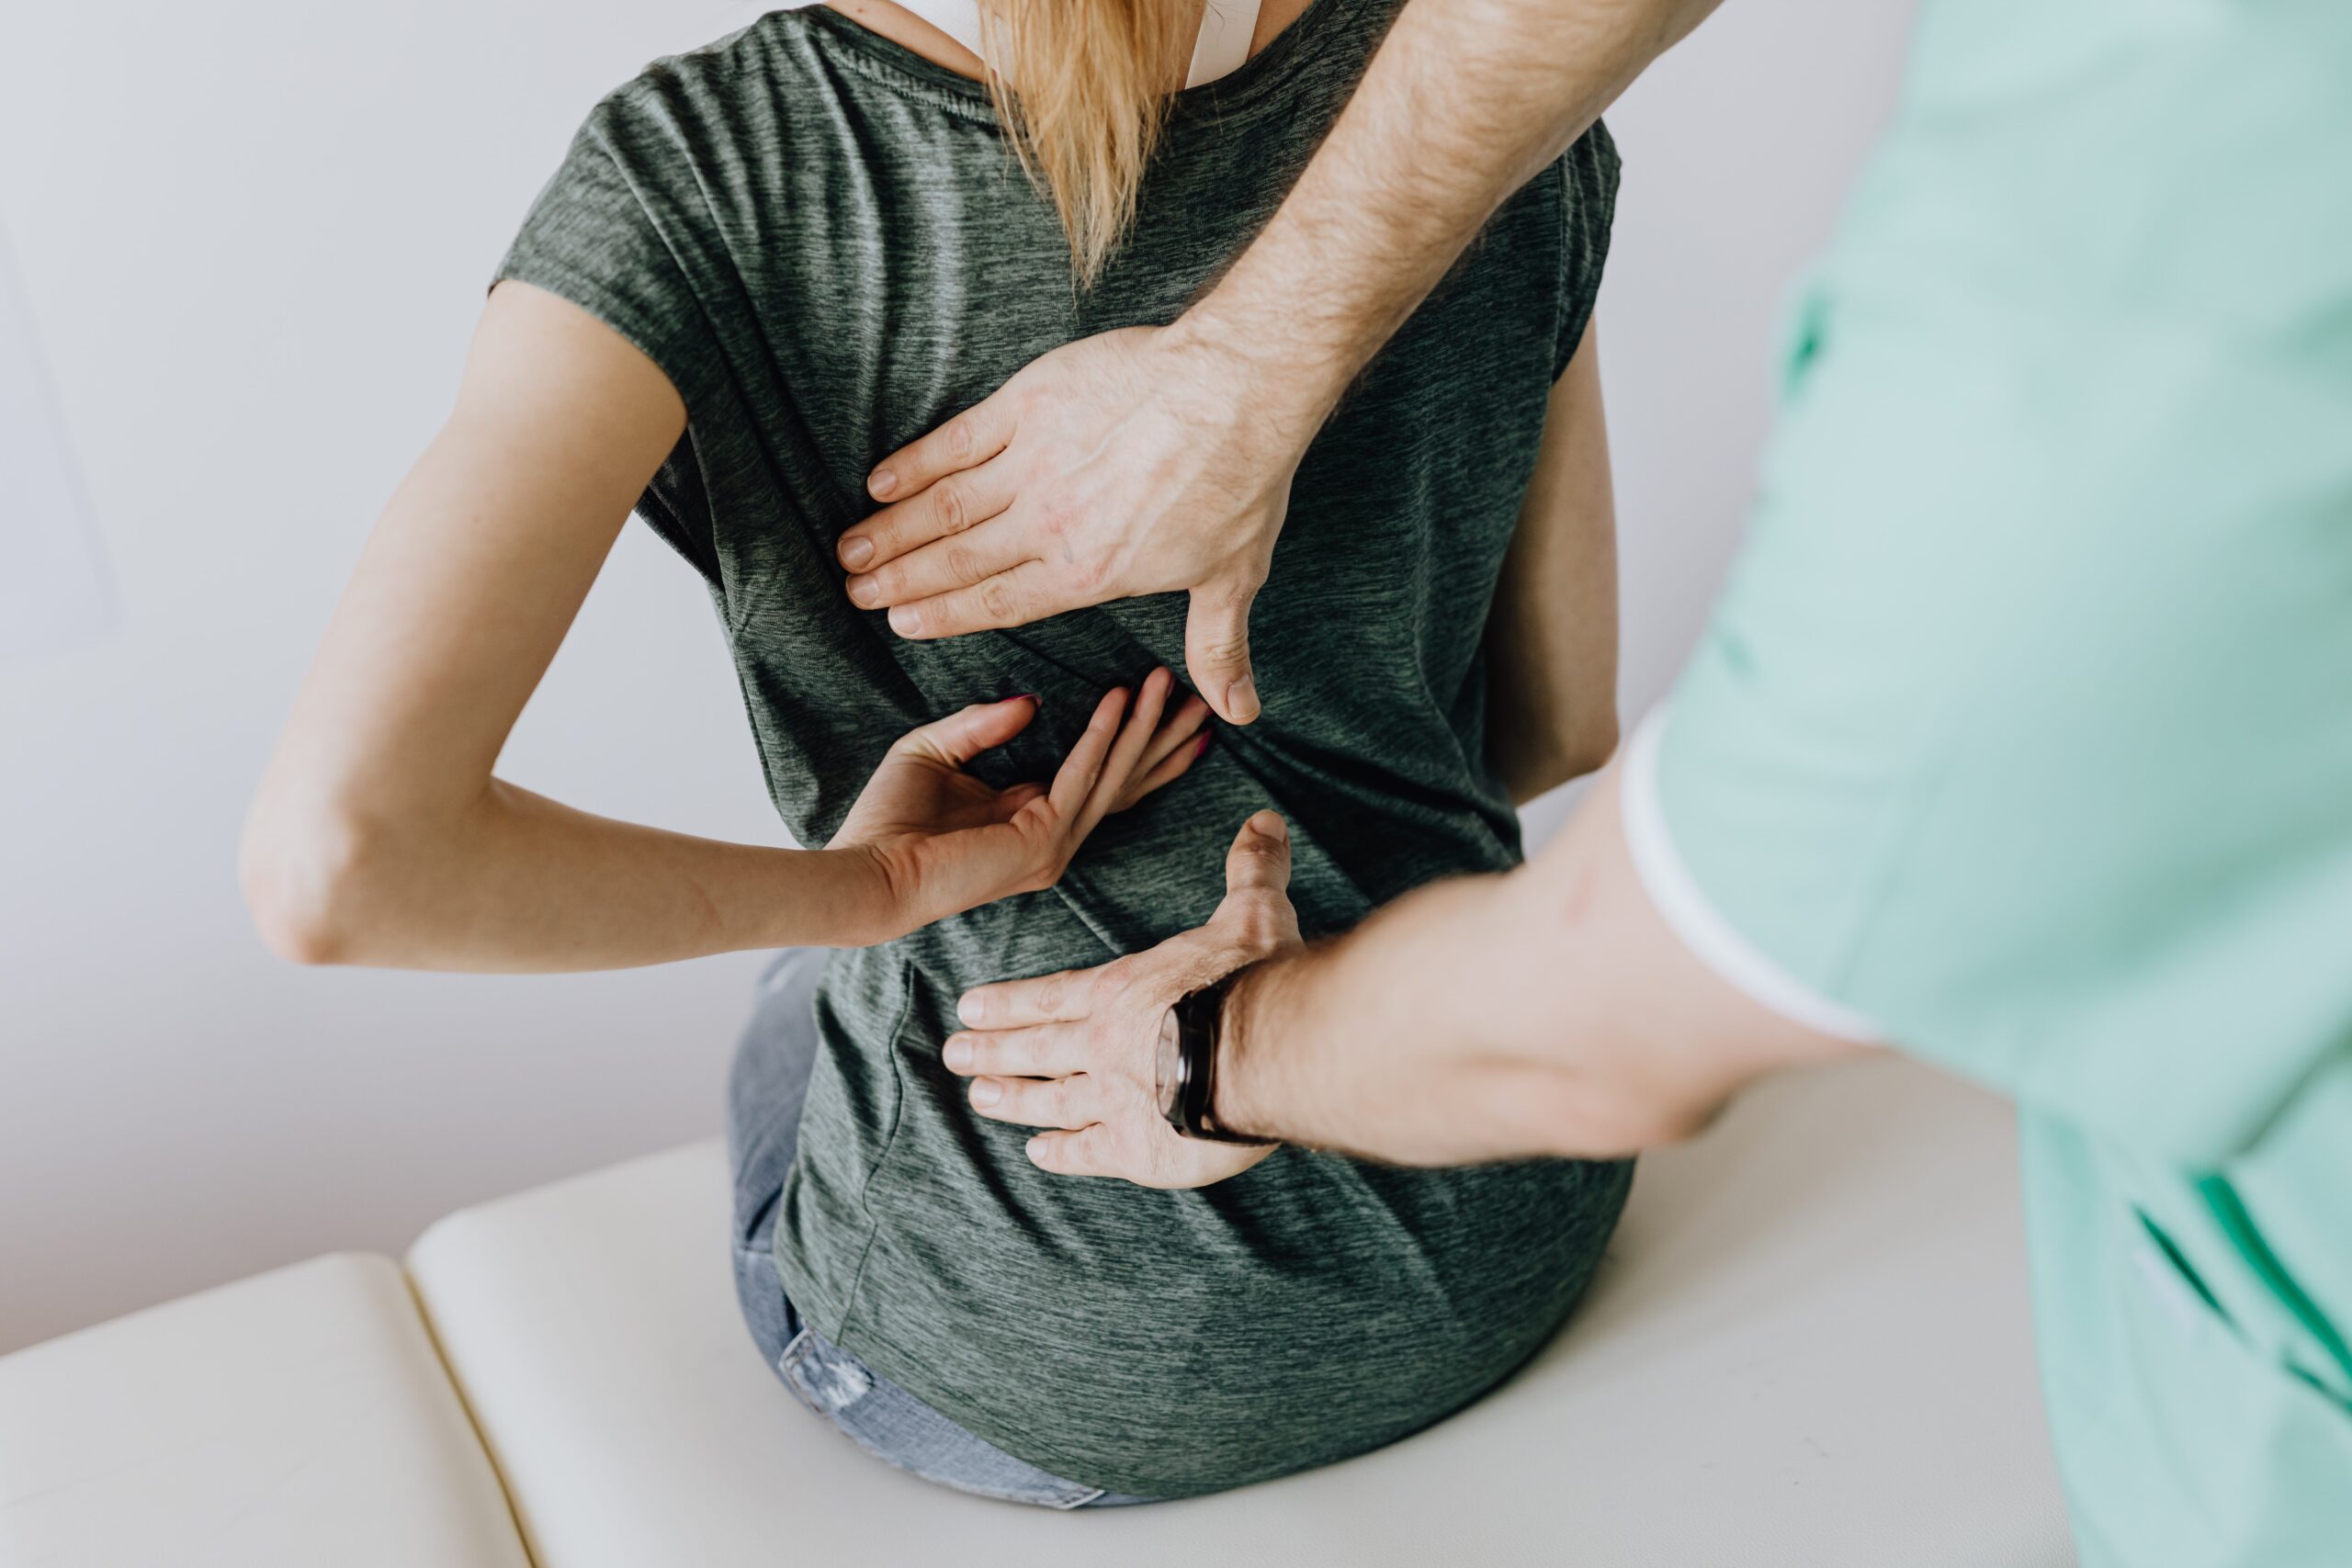 What Does A Chiropractor Do For Lower Back Pain?